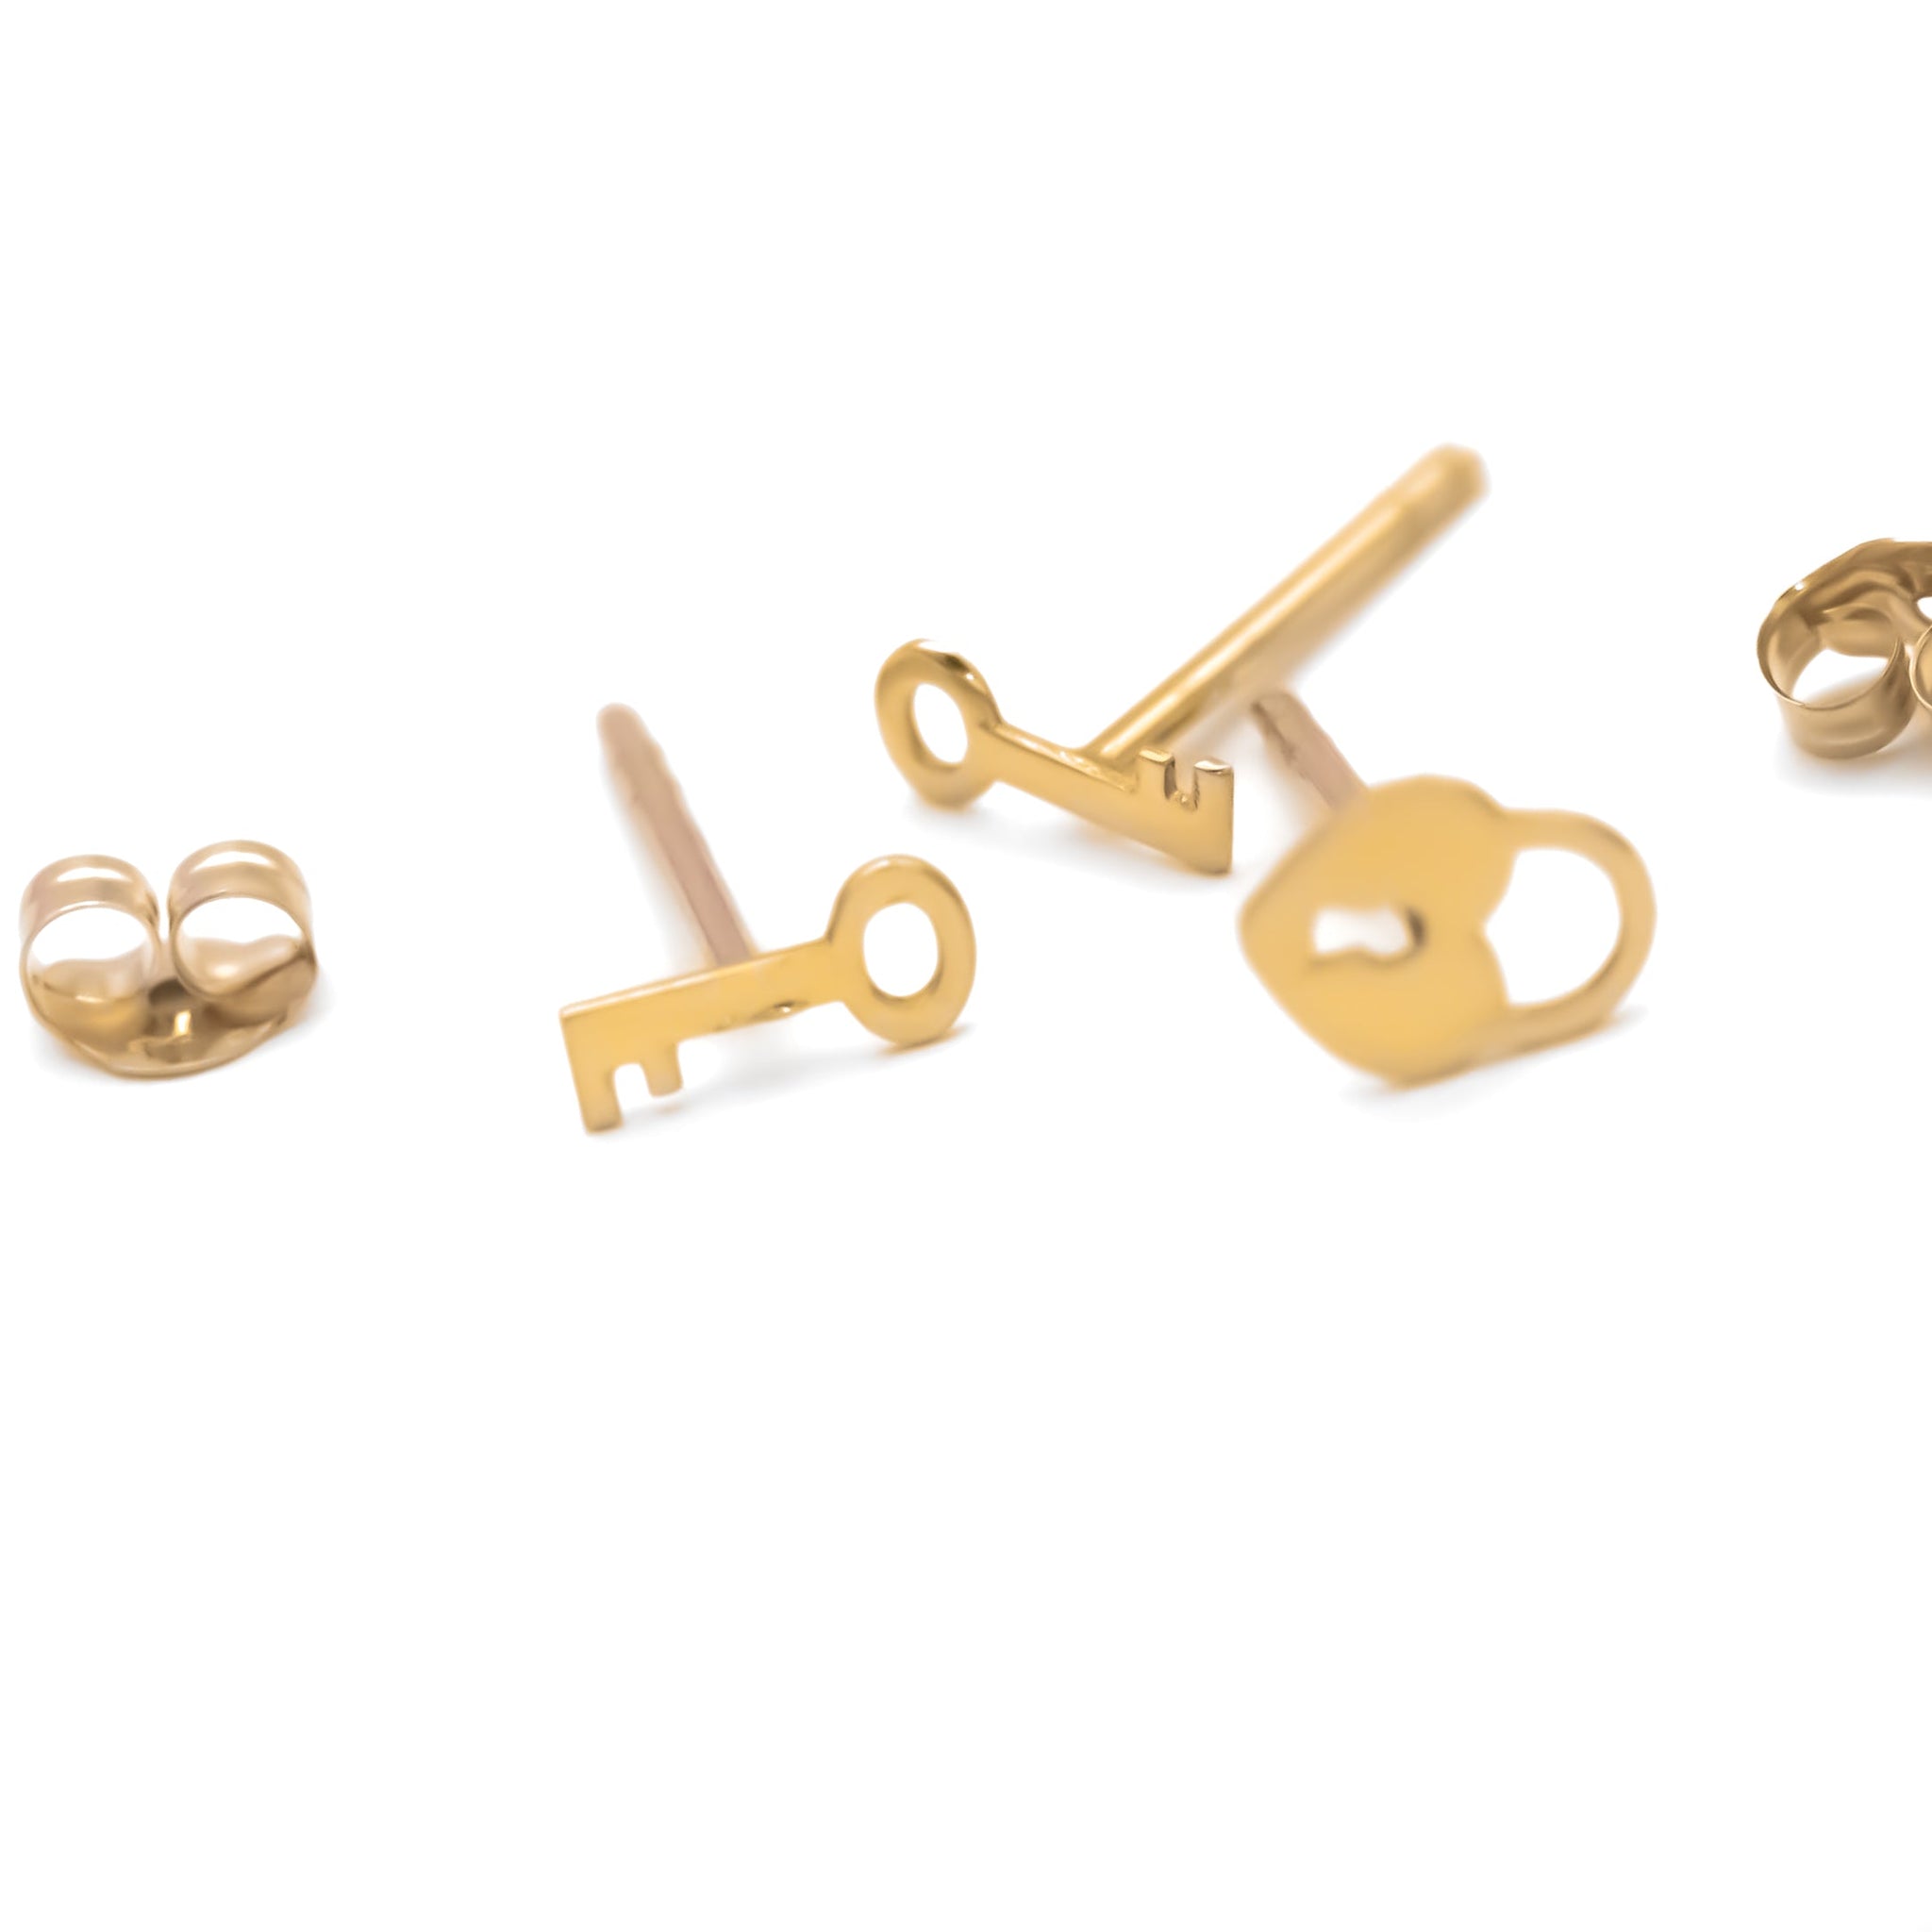 🎁70% off bundle of 5 or more items 🎁 3 Piece Set Lock and Key Earrings |  Shop earrings, Earrings, Lock and key